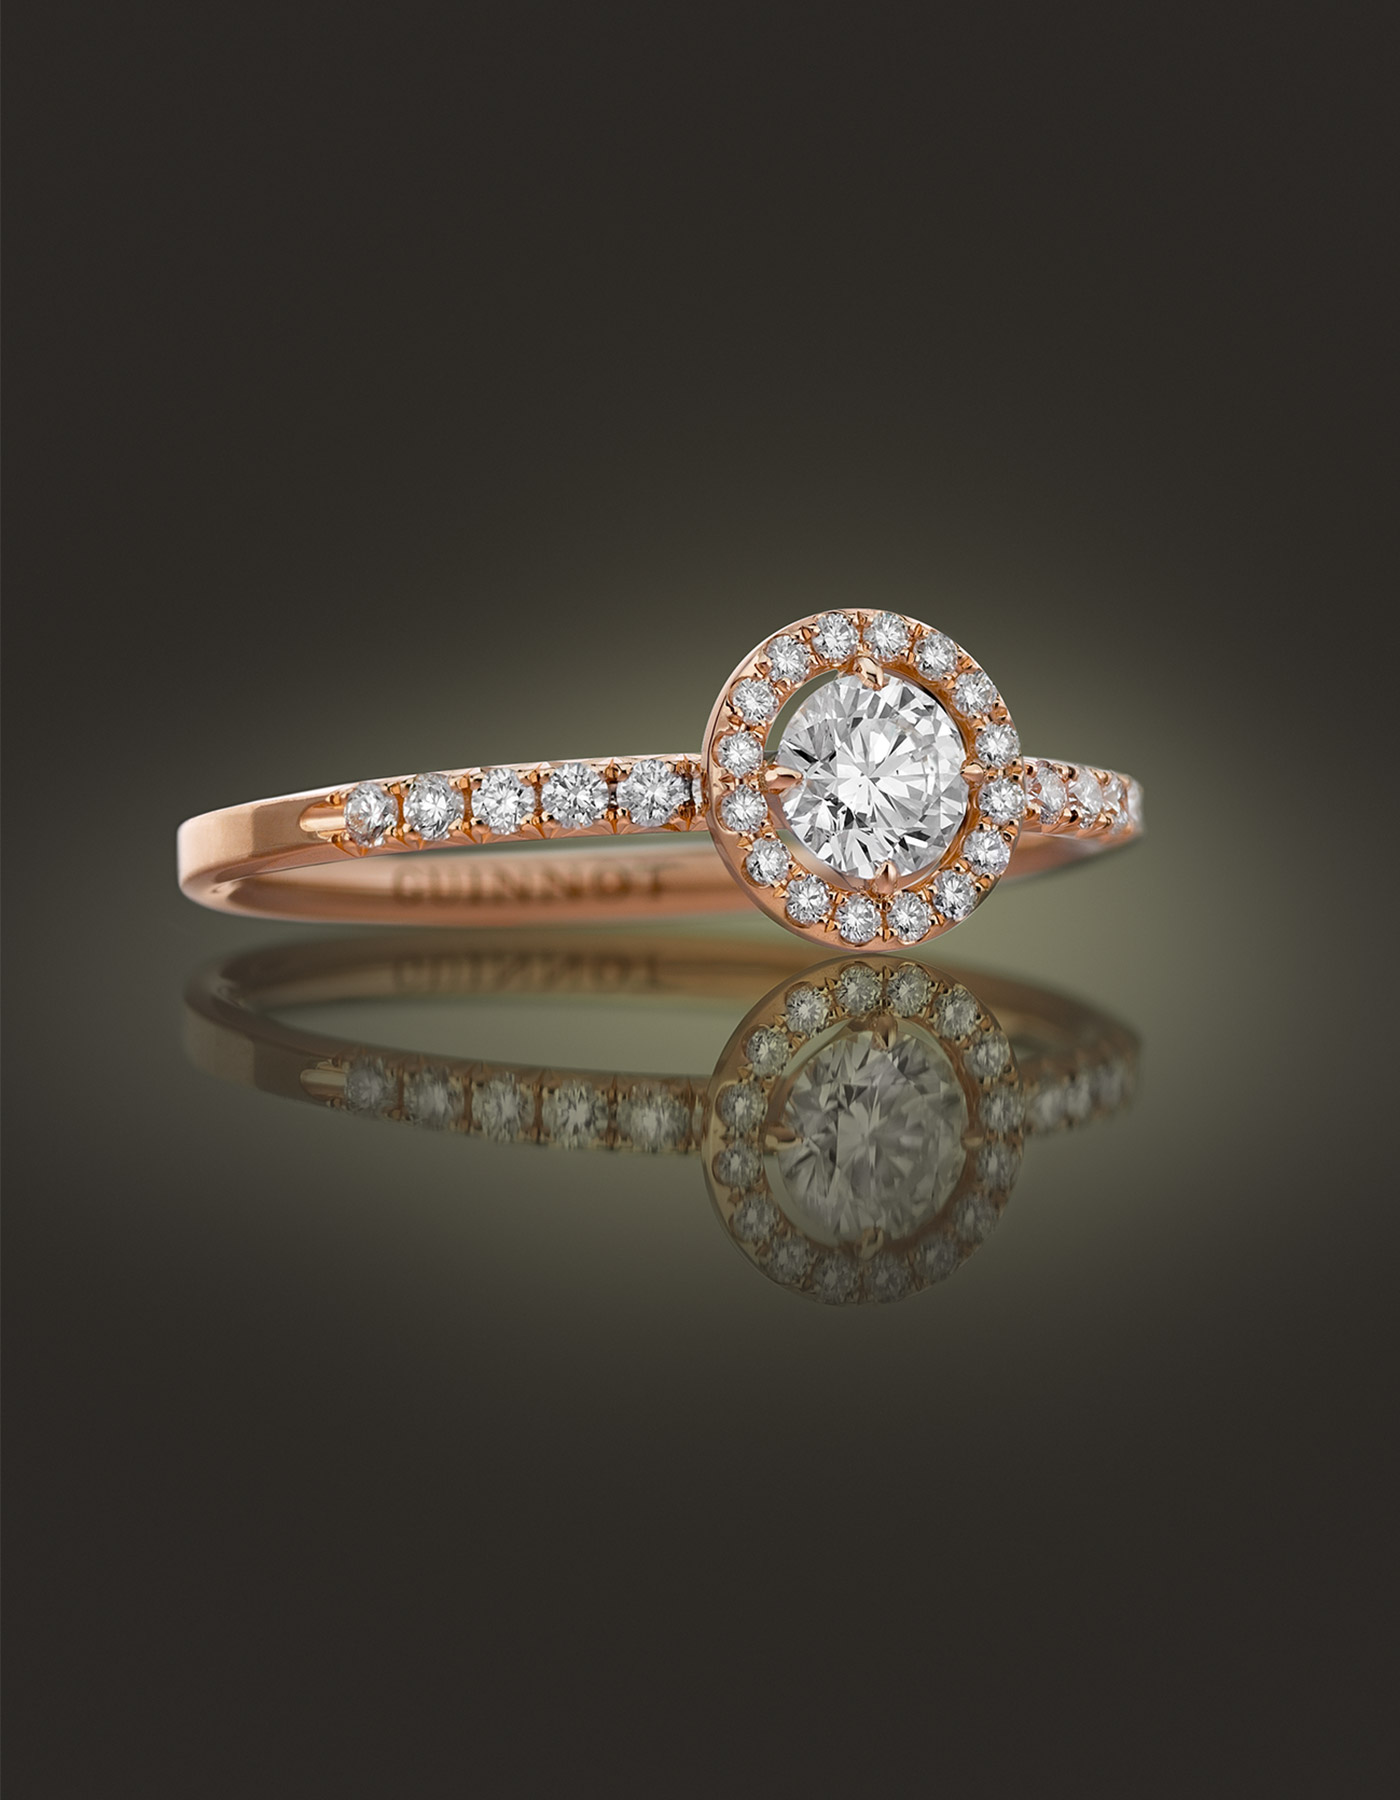 Guinnot Anonymous Halo diamond ring in 18k rose gold